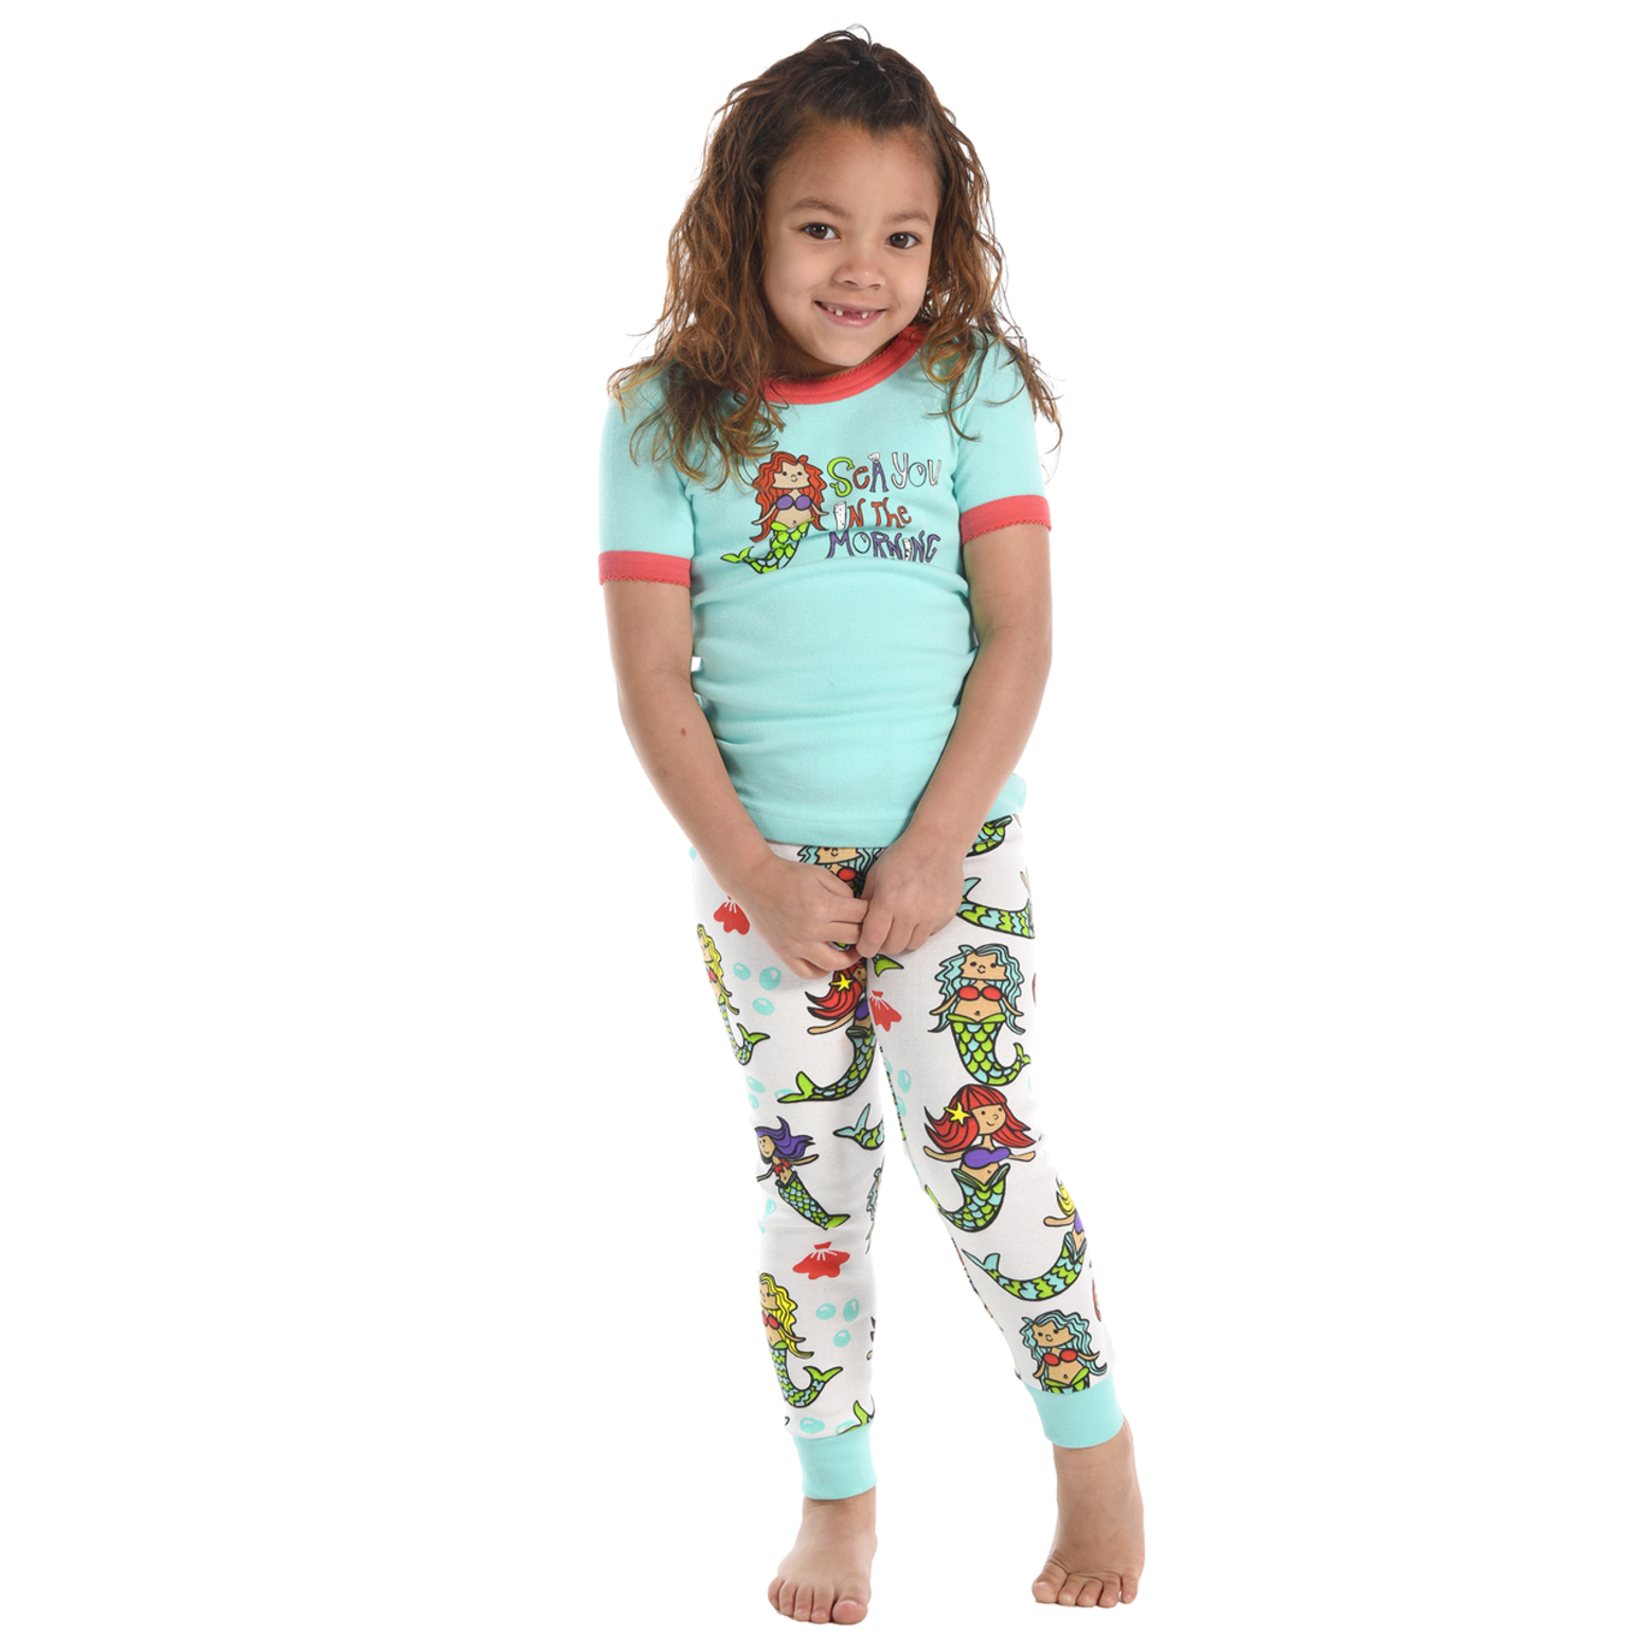 Lazy One (DNR) Sea You in the Morning Kid's Short Sleeve Mermaid PJ's